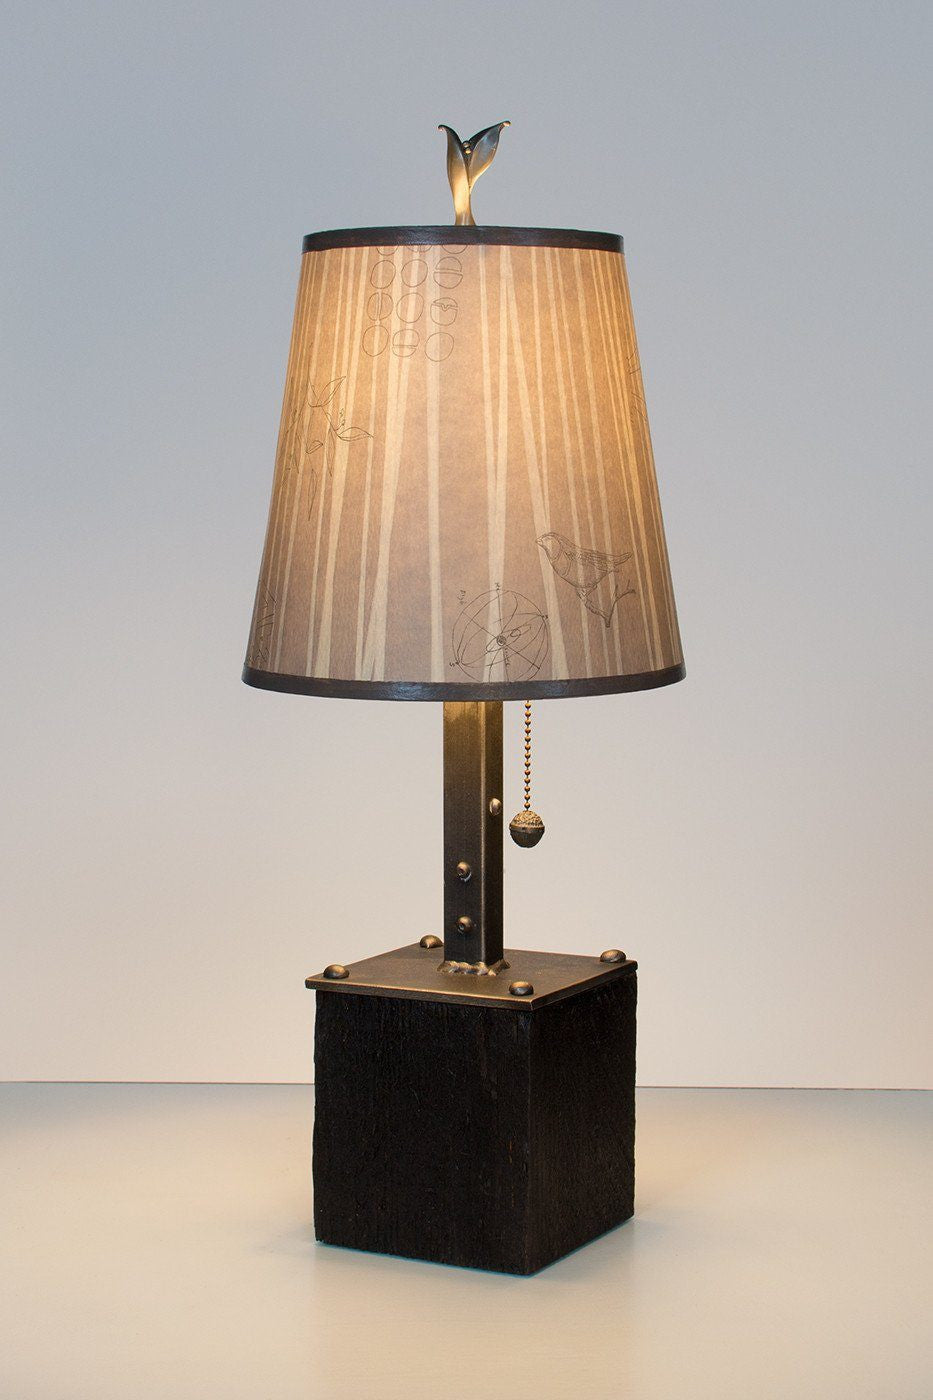 Janna Ugone & Co Table Lamps Steel Table Lamp on Reclaimed Wood with Small Drum Shade in Birch Lines